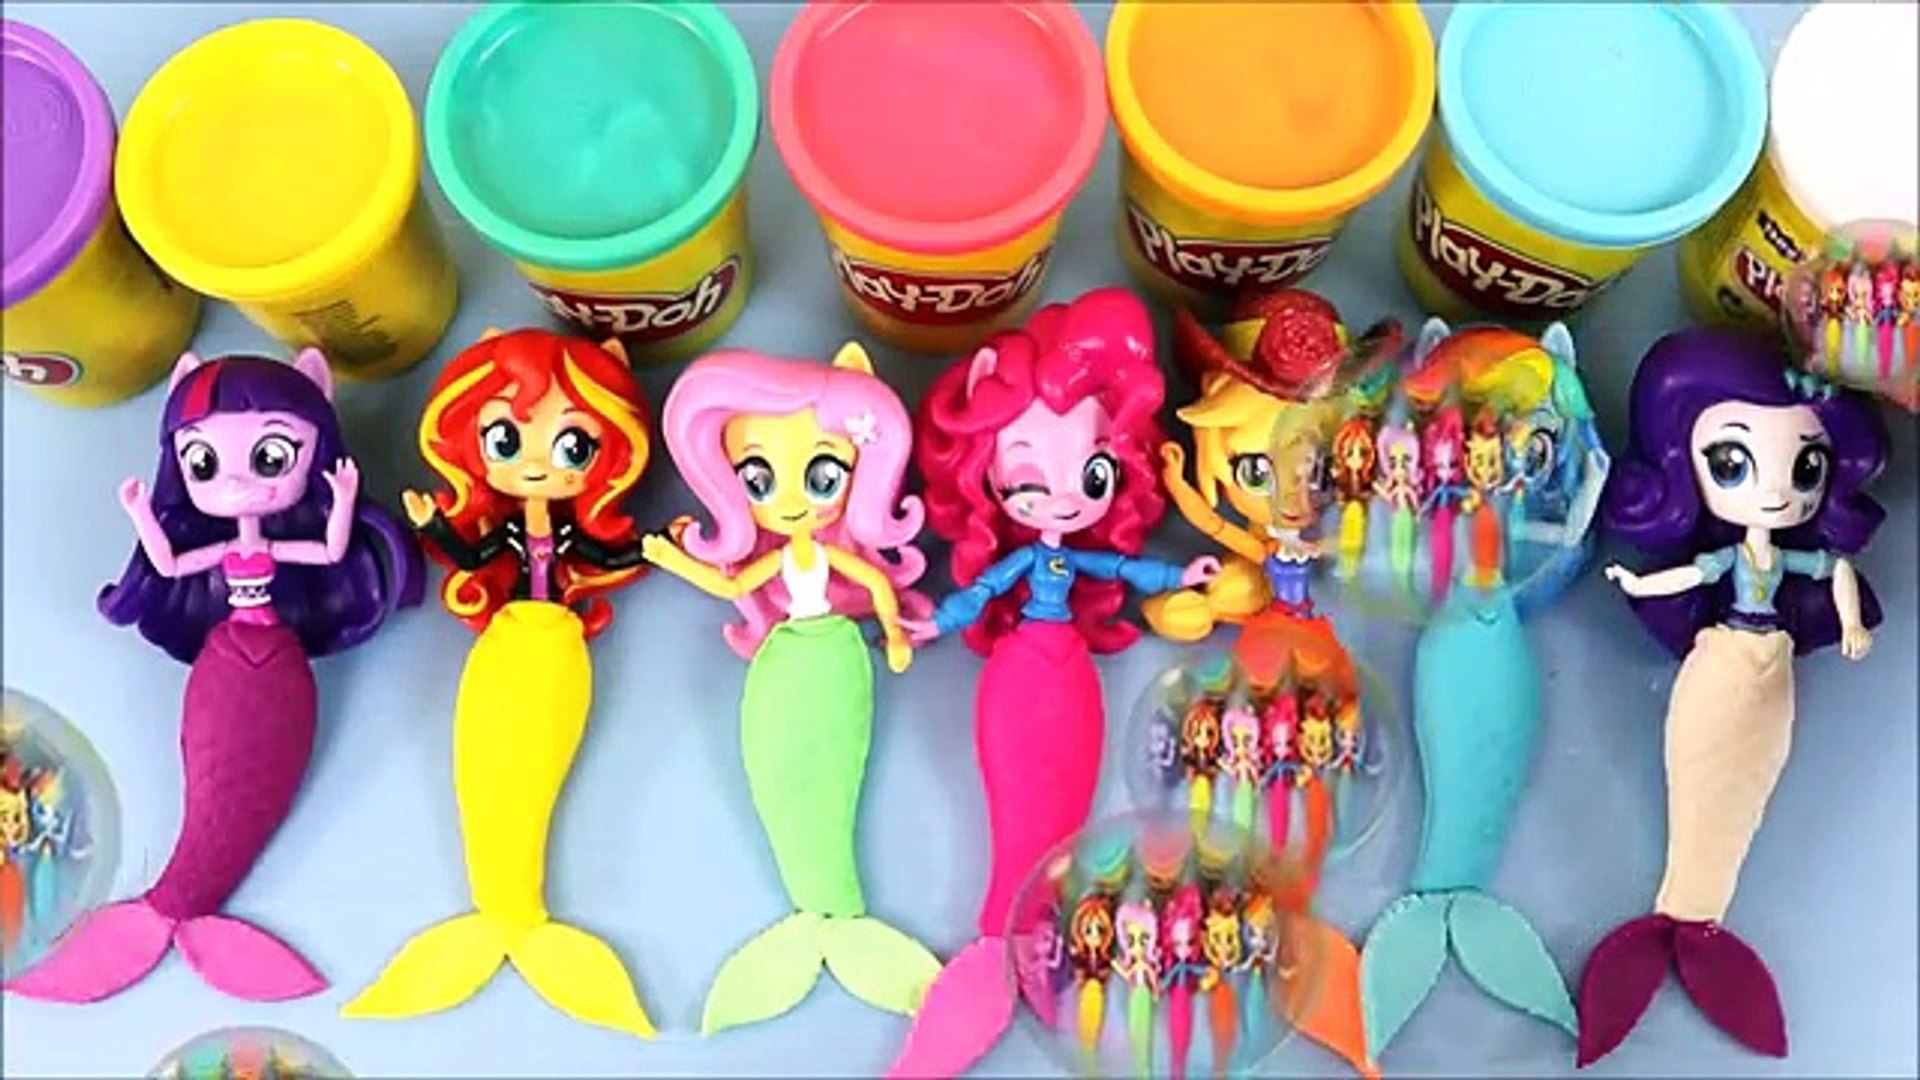 Equestria Girls Play-doh Mermaids with My Little Pony Toys Surprises! -  video Dailymotion